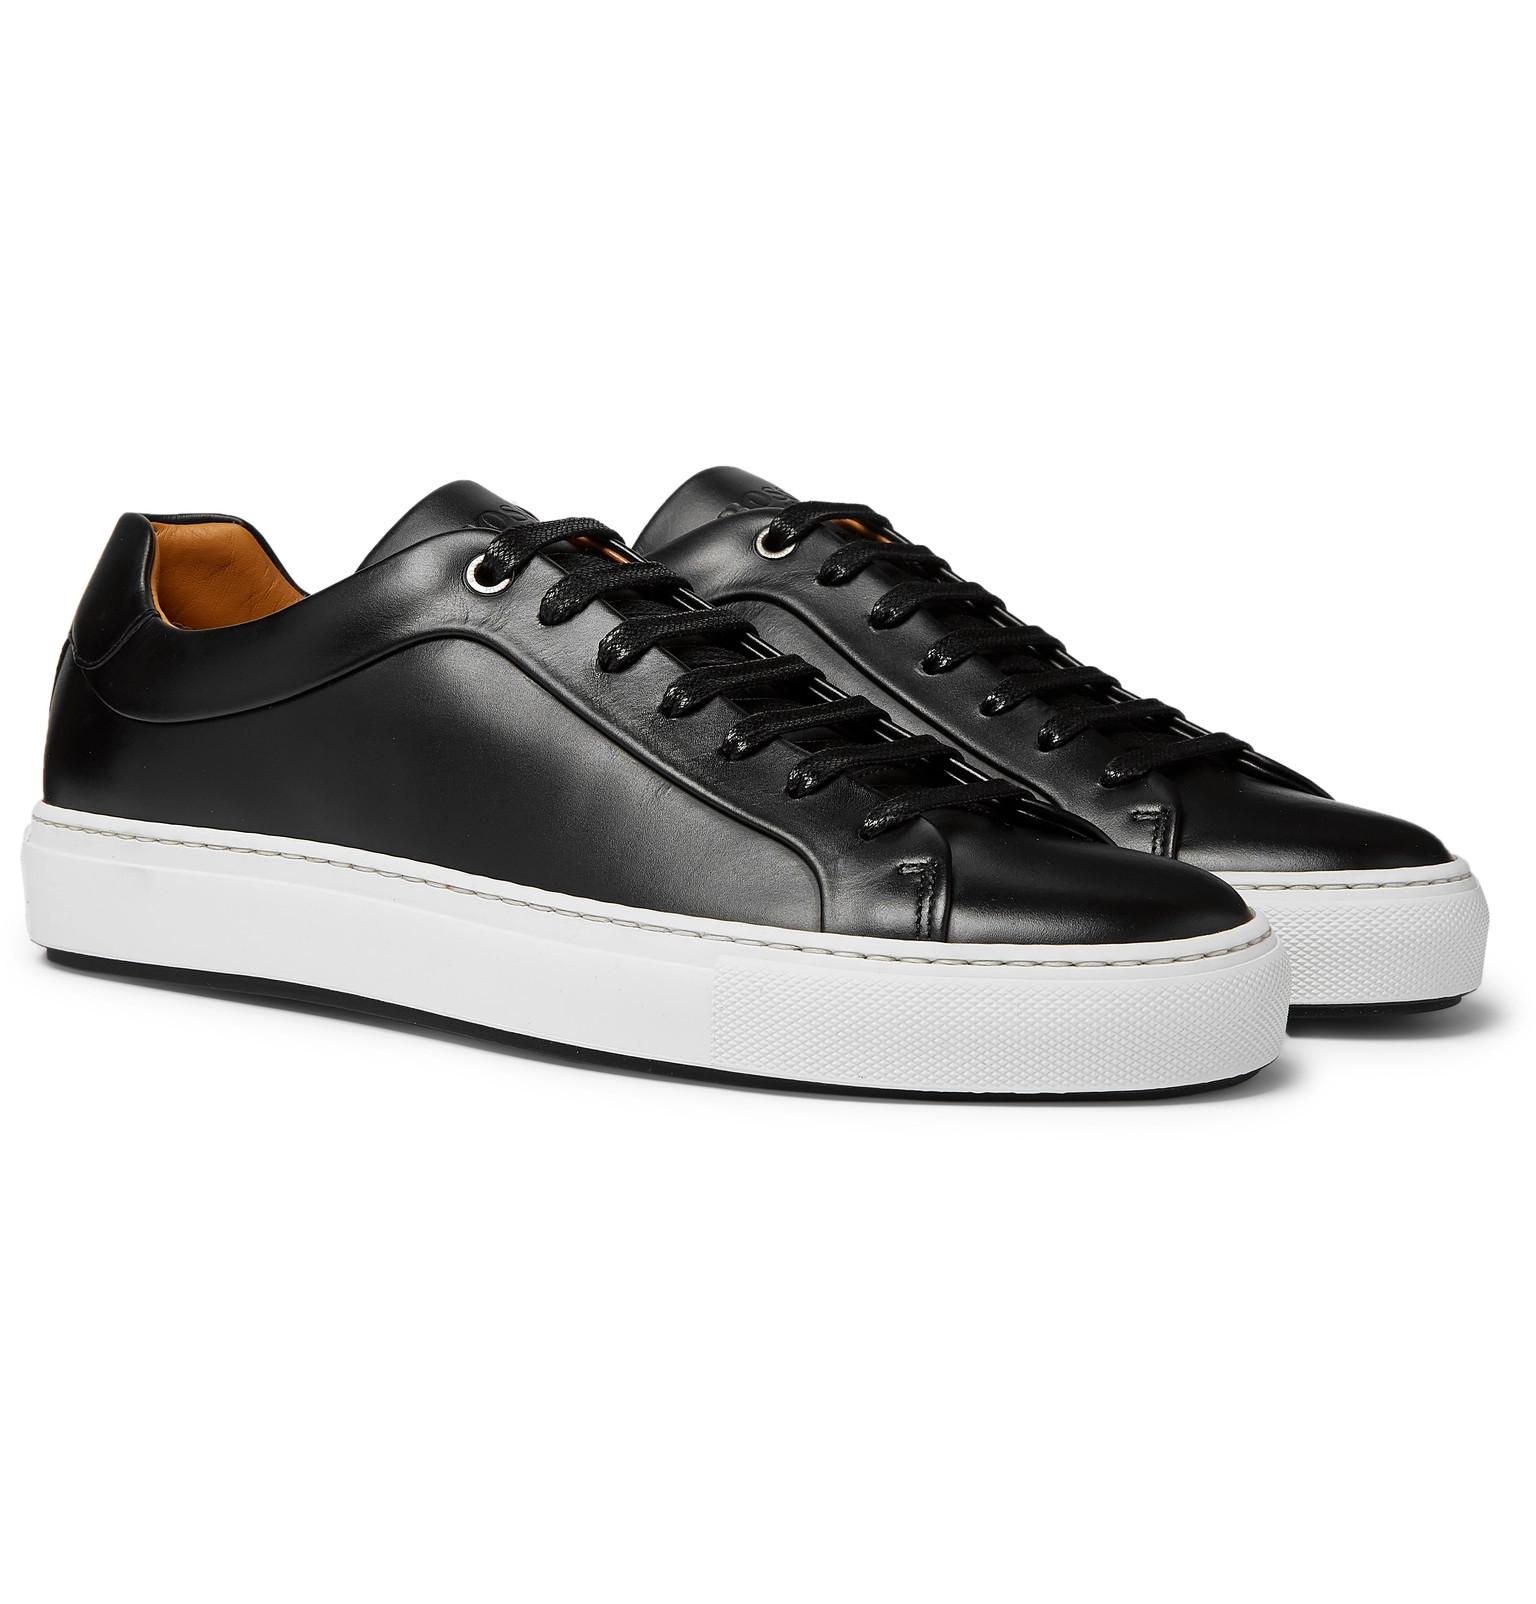 BOSS Mirage Burnished-leather Sneakers in Black for Men - Lyst